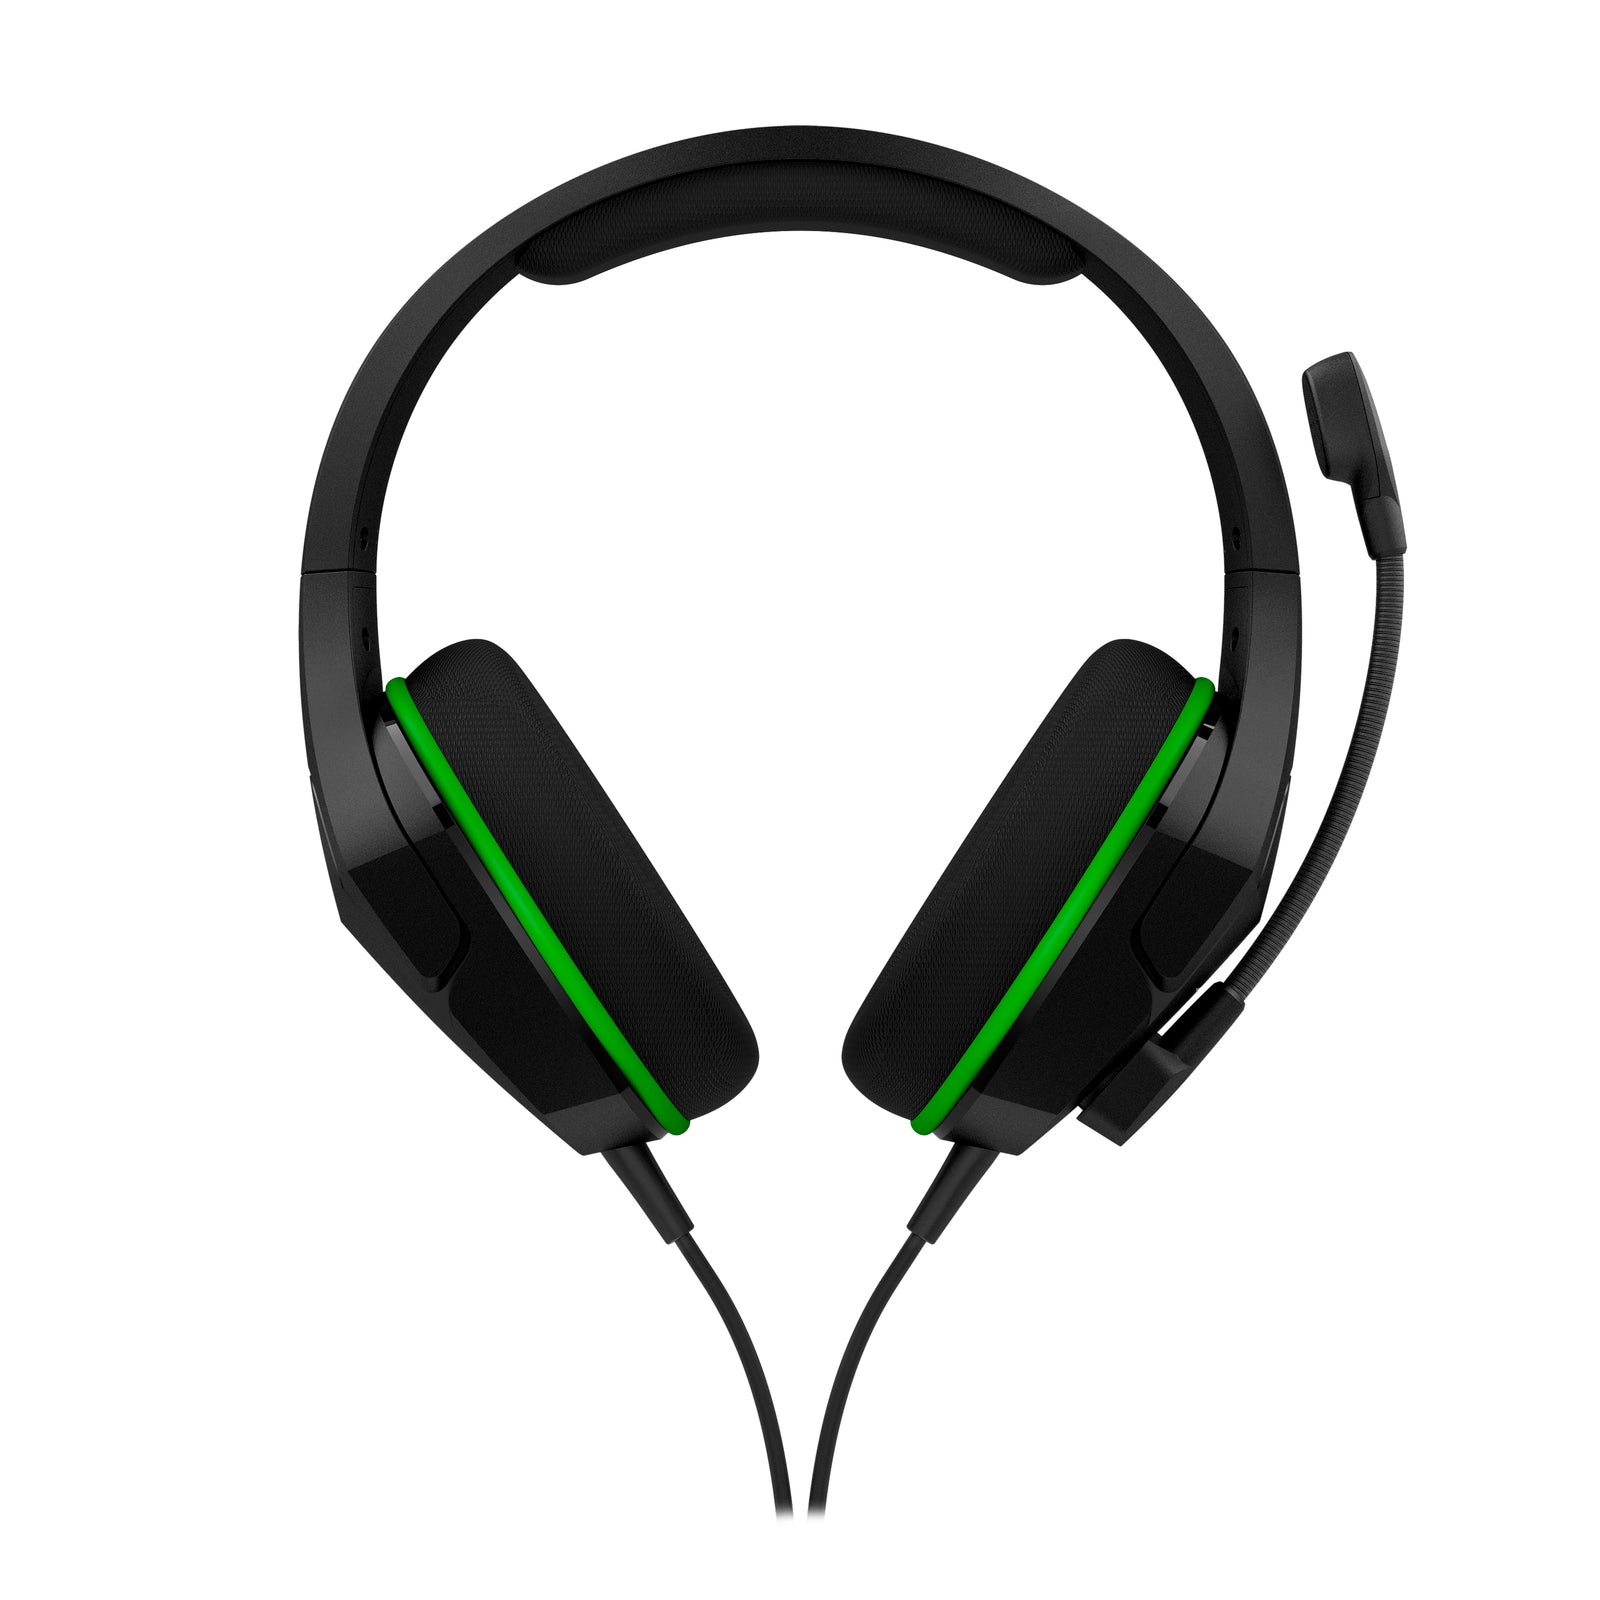 HyperX CloudX Stinger Core Wireless Gaming Headset for Xbox X